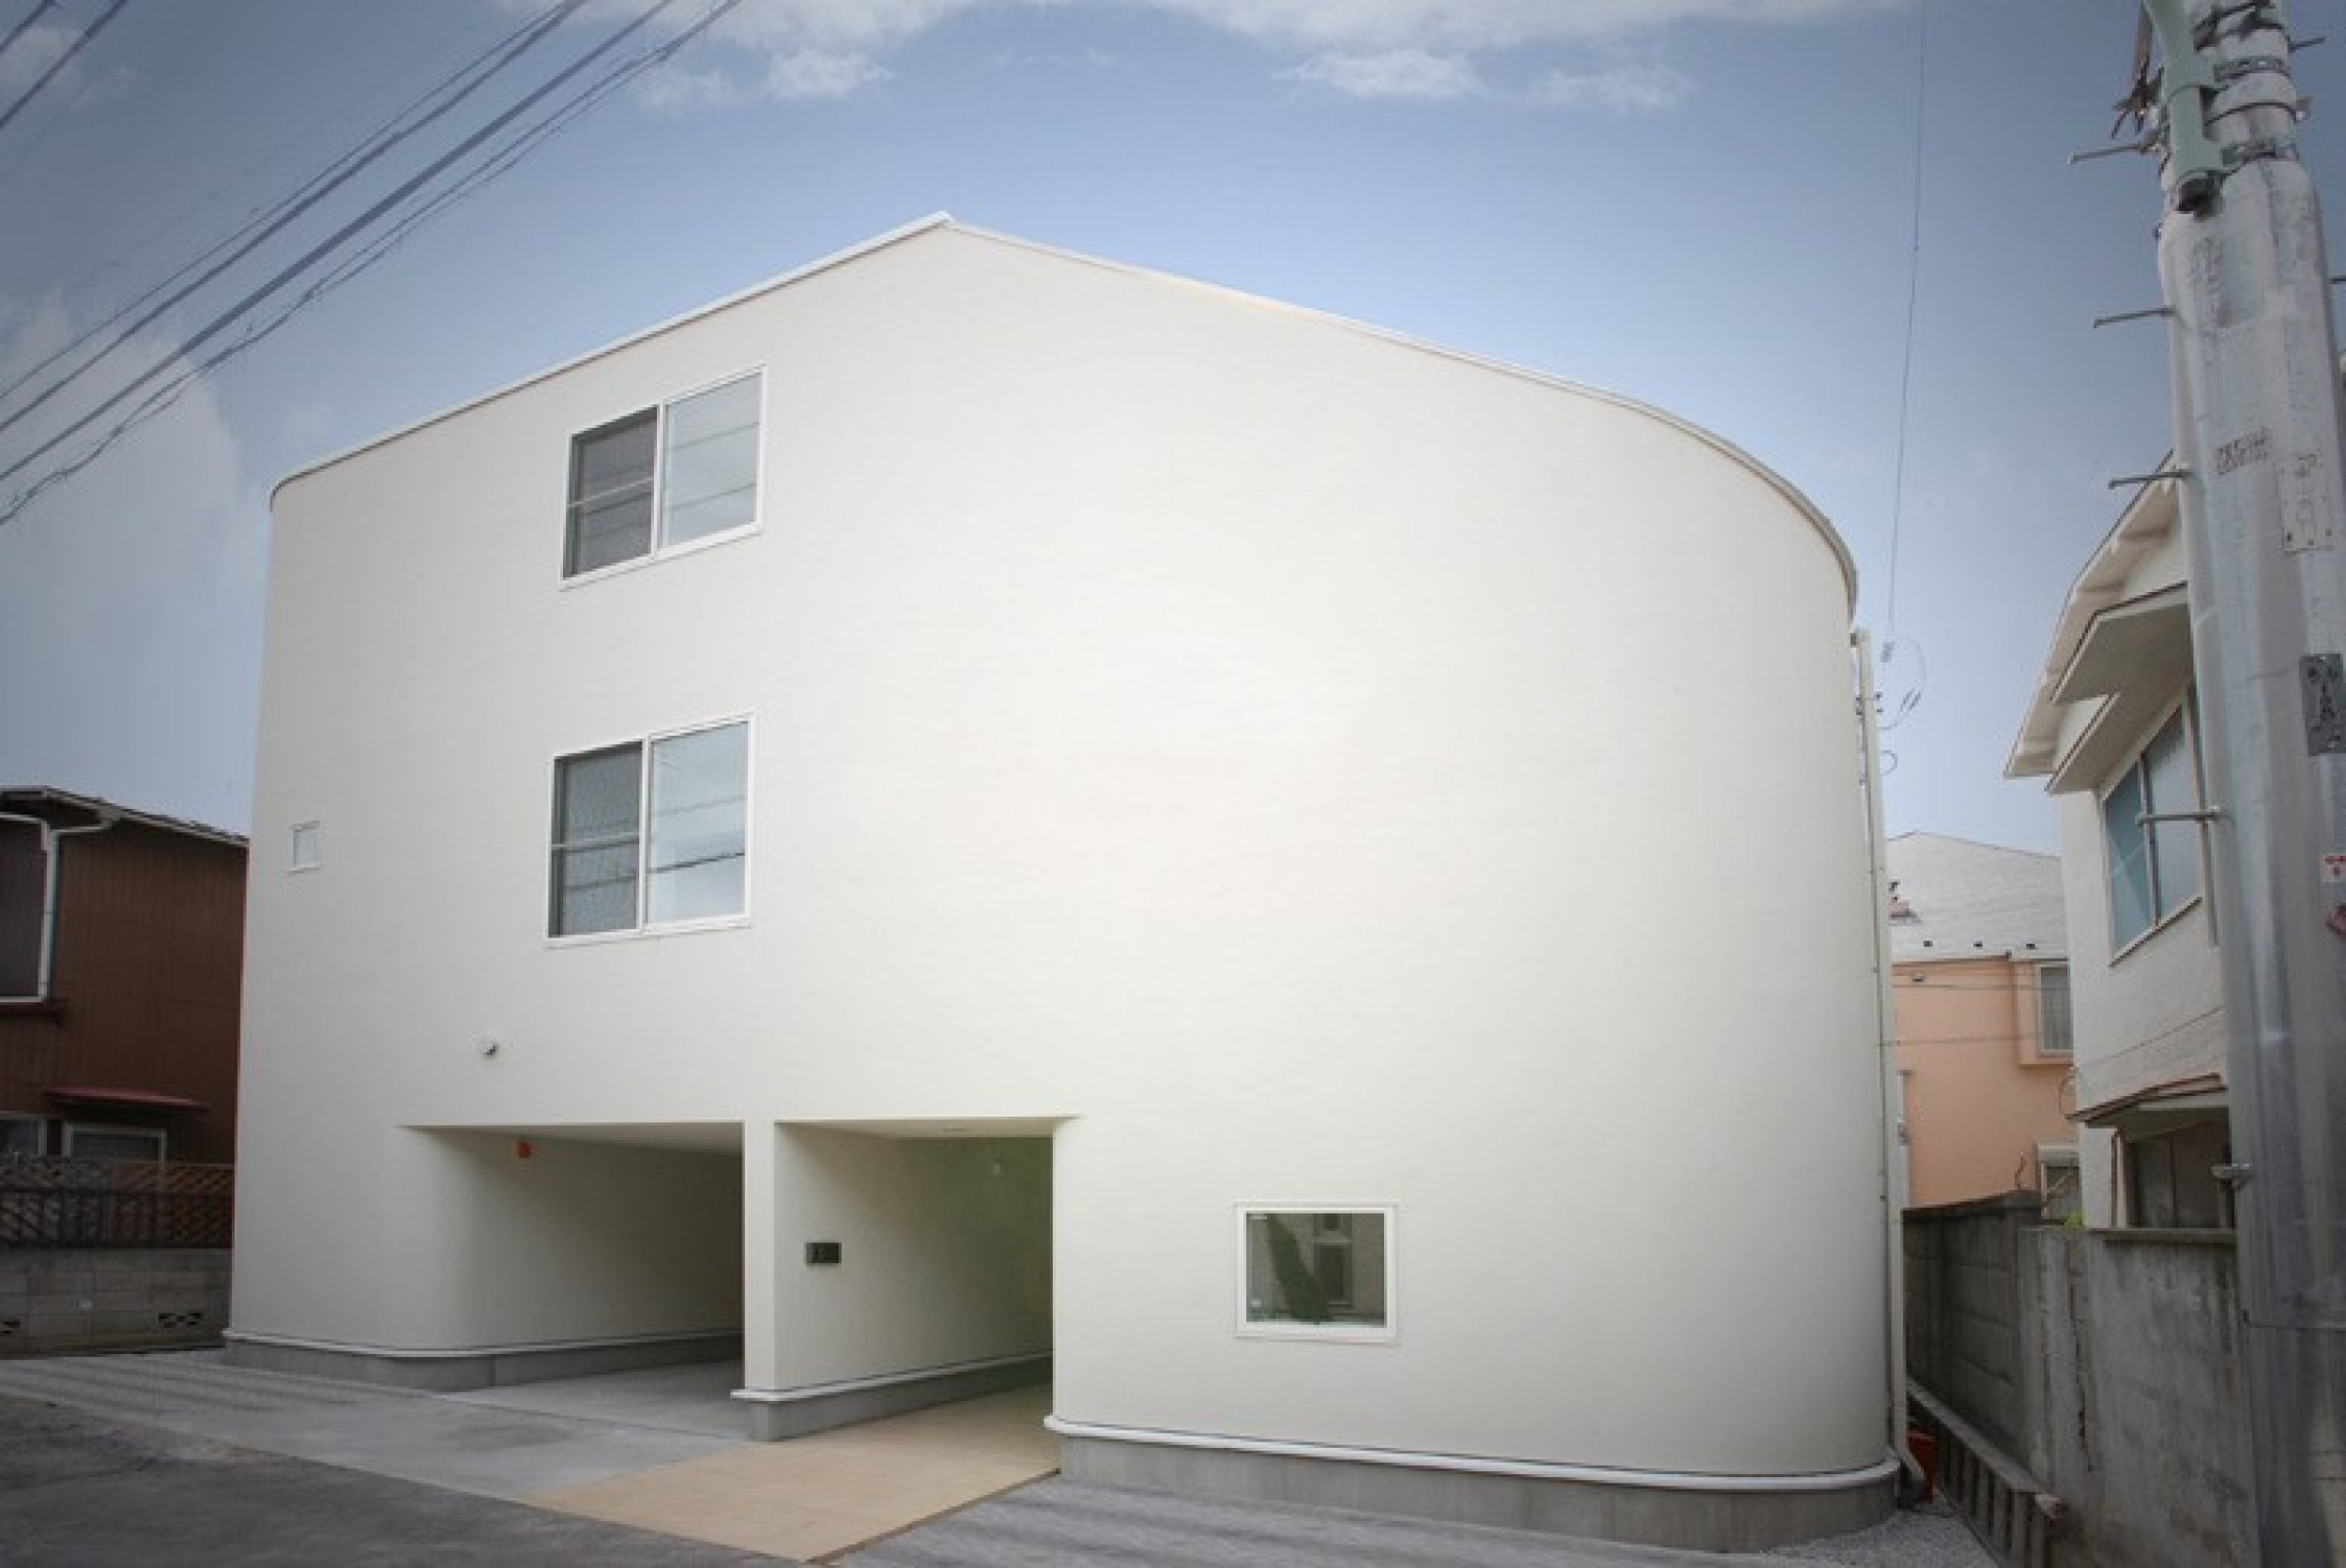 House of slide by Level Architects in Tokyo